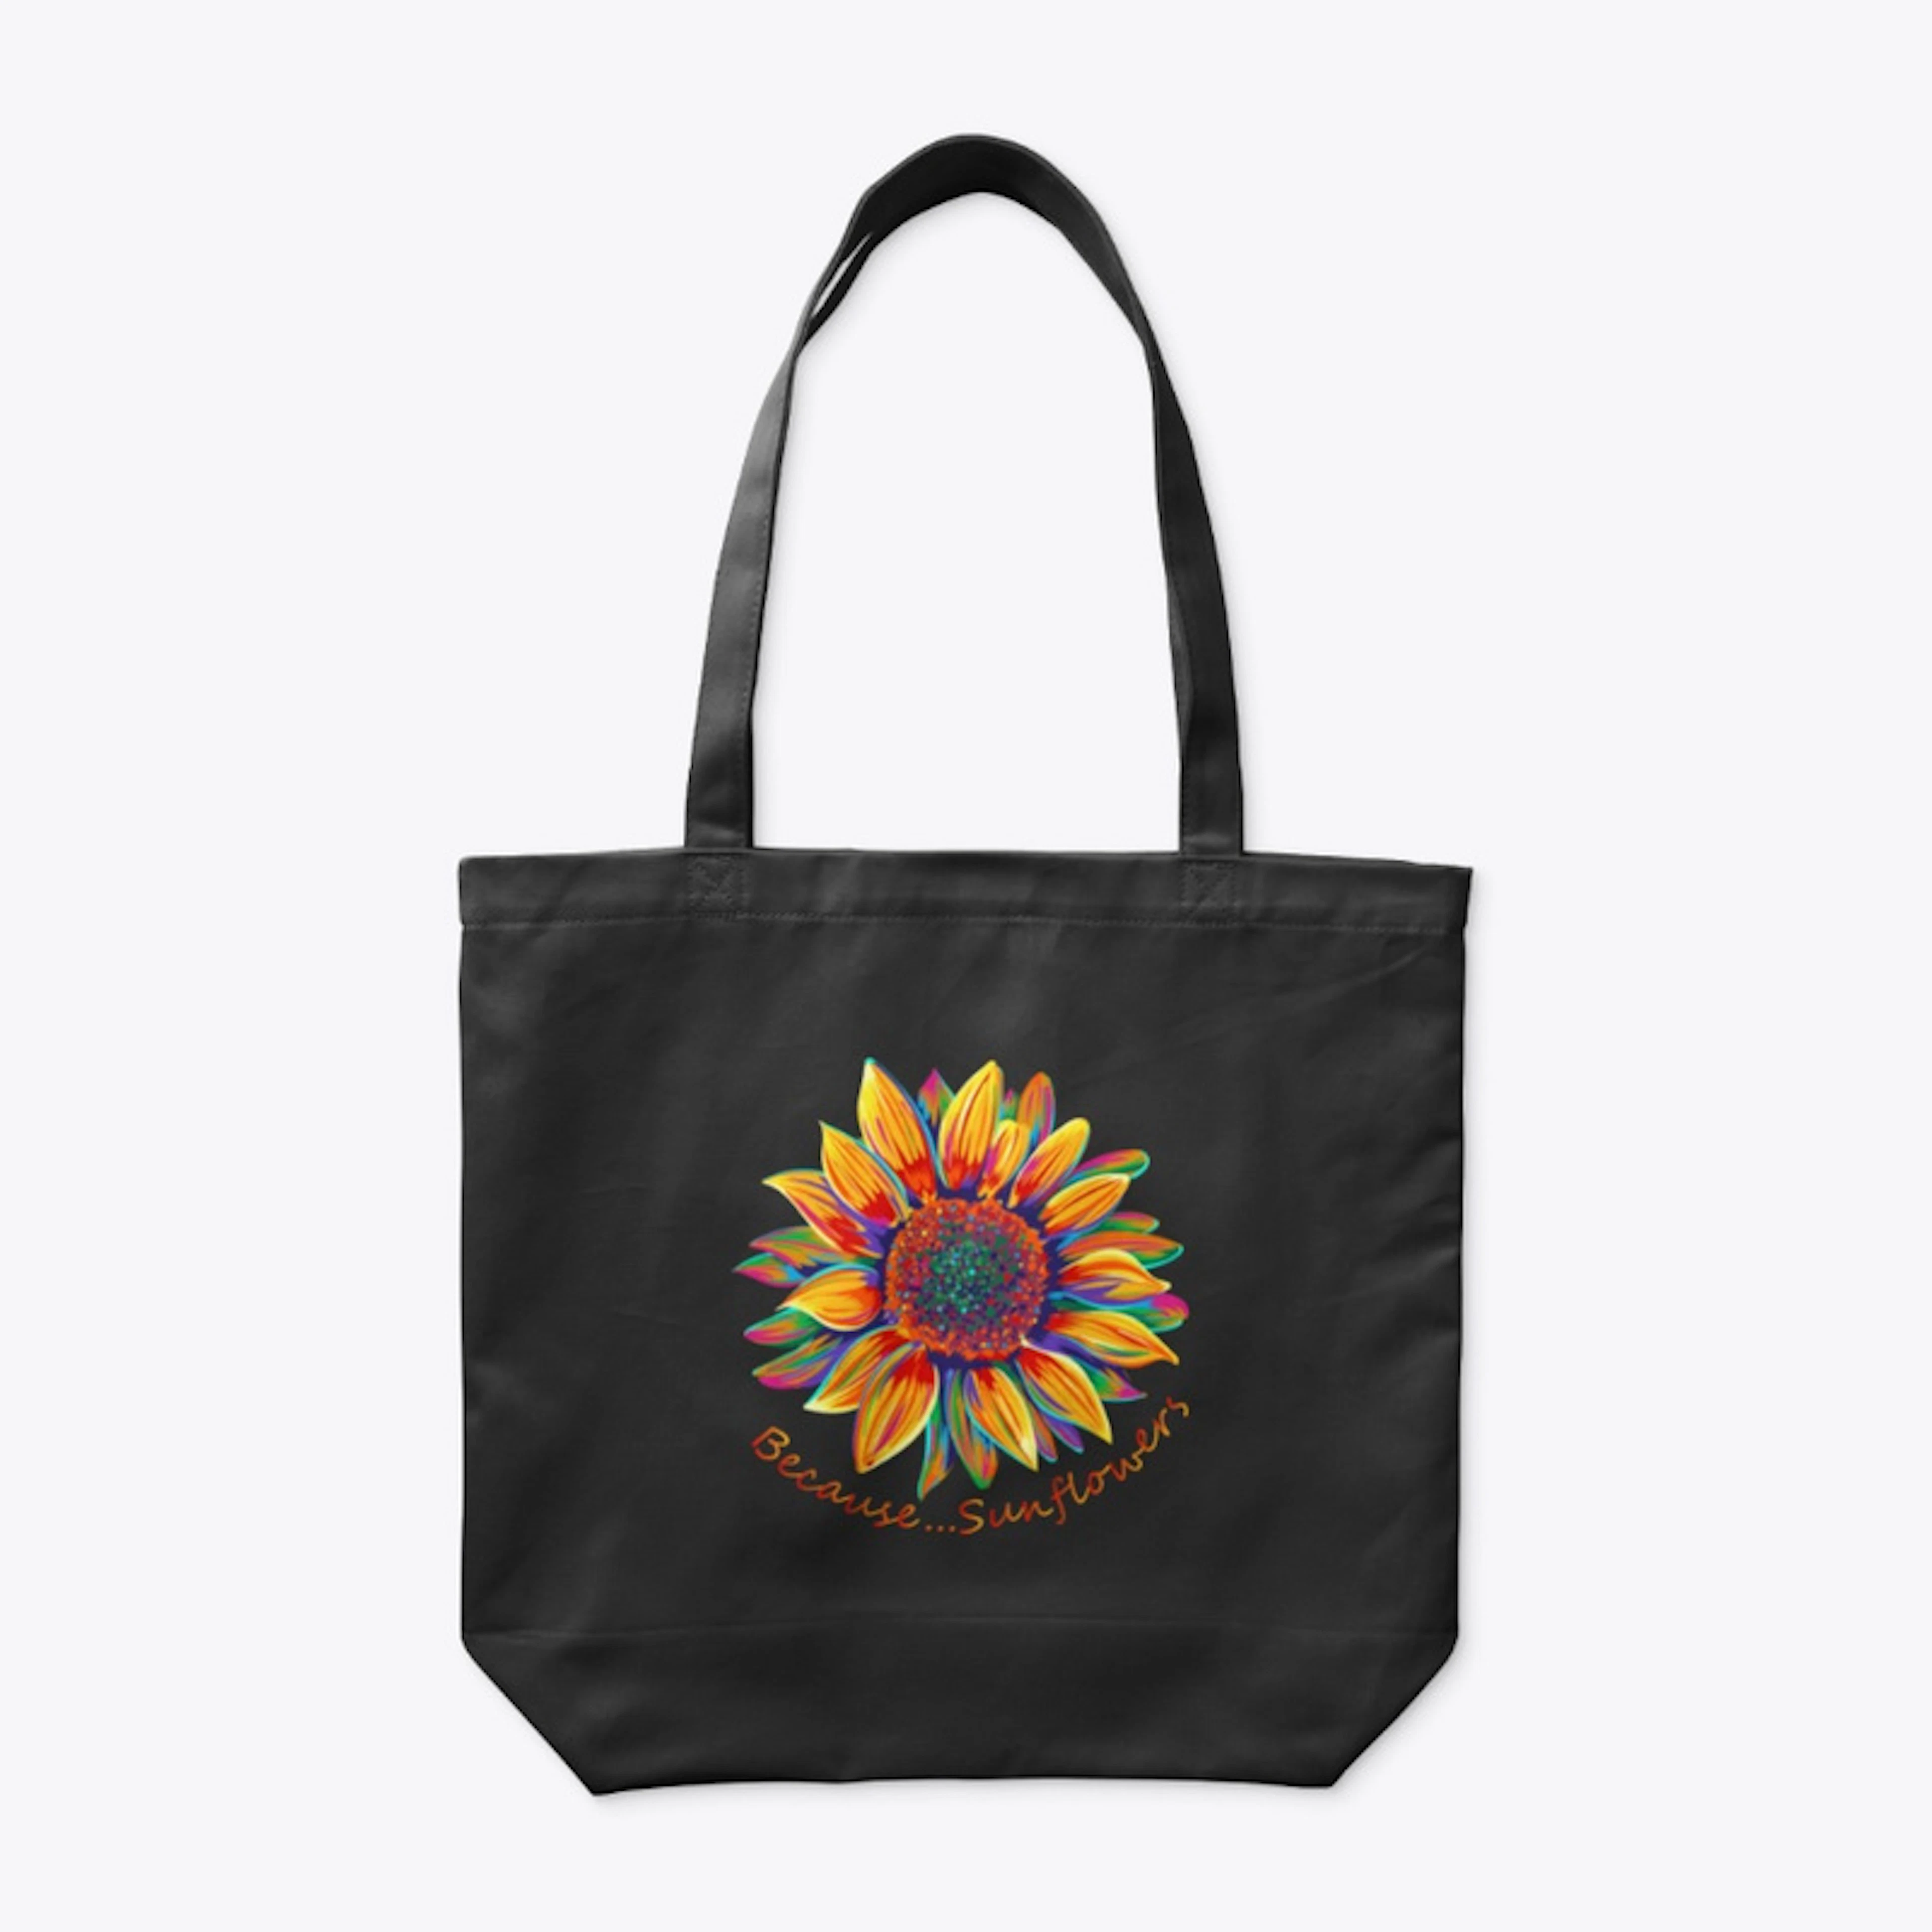 Sunflowers "Painted Sunflower" Tote